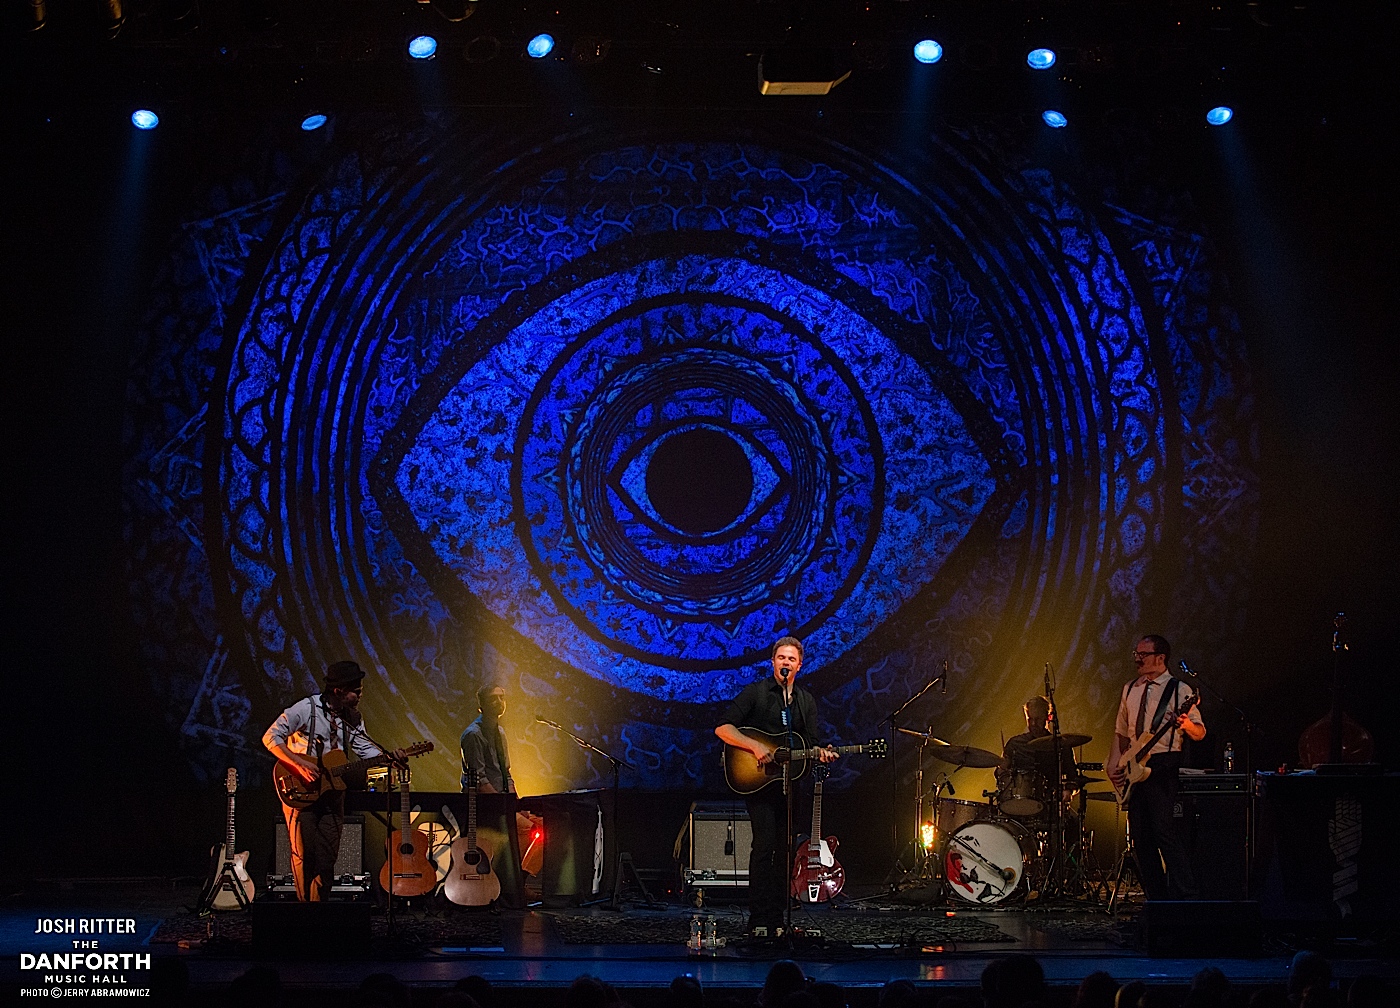 JOSH RITTER performs at The Danforth Music Hall.